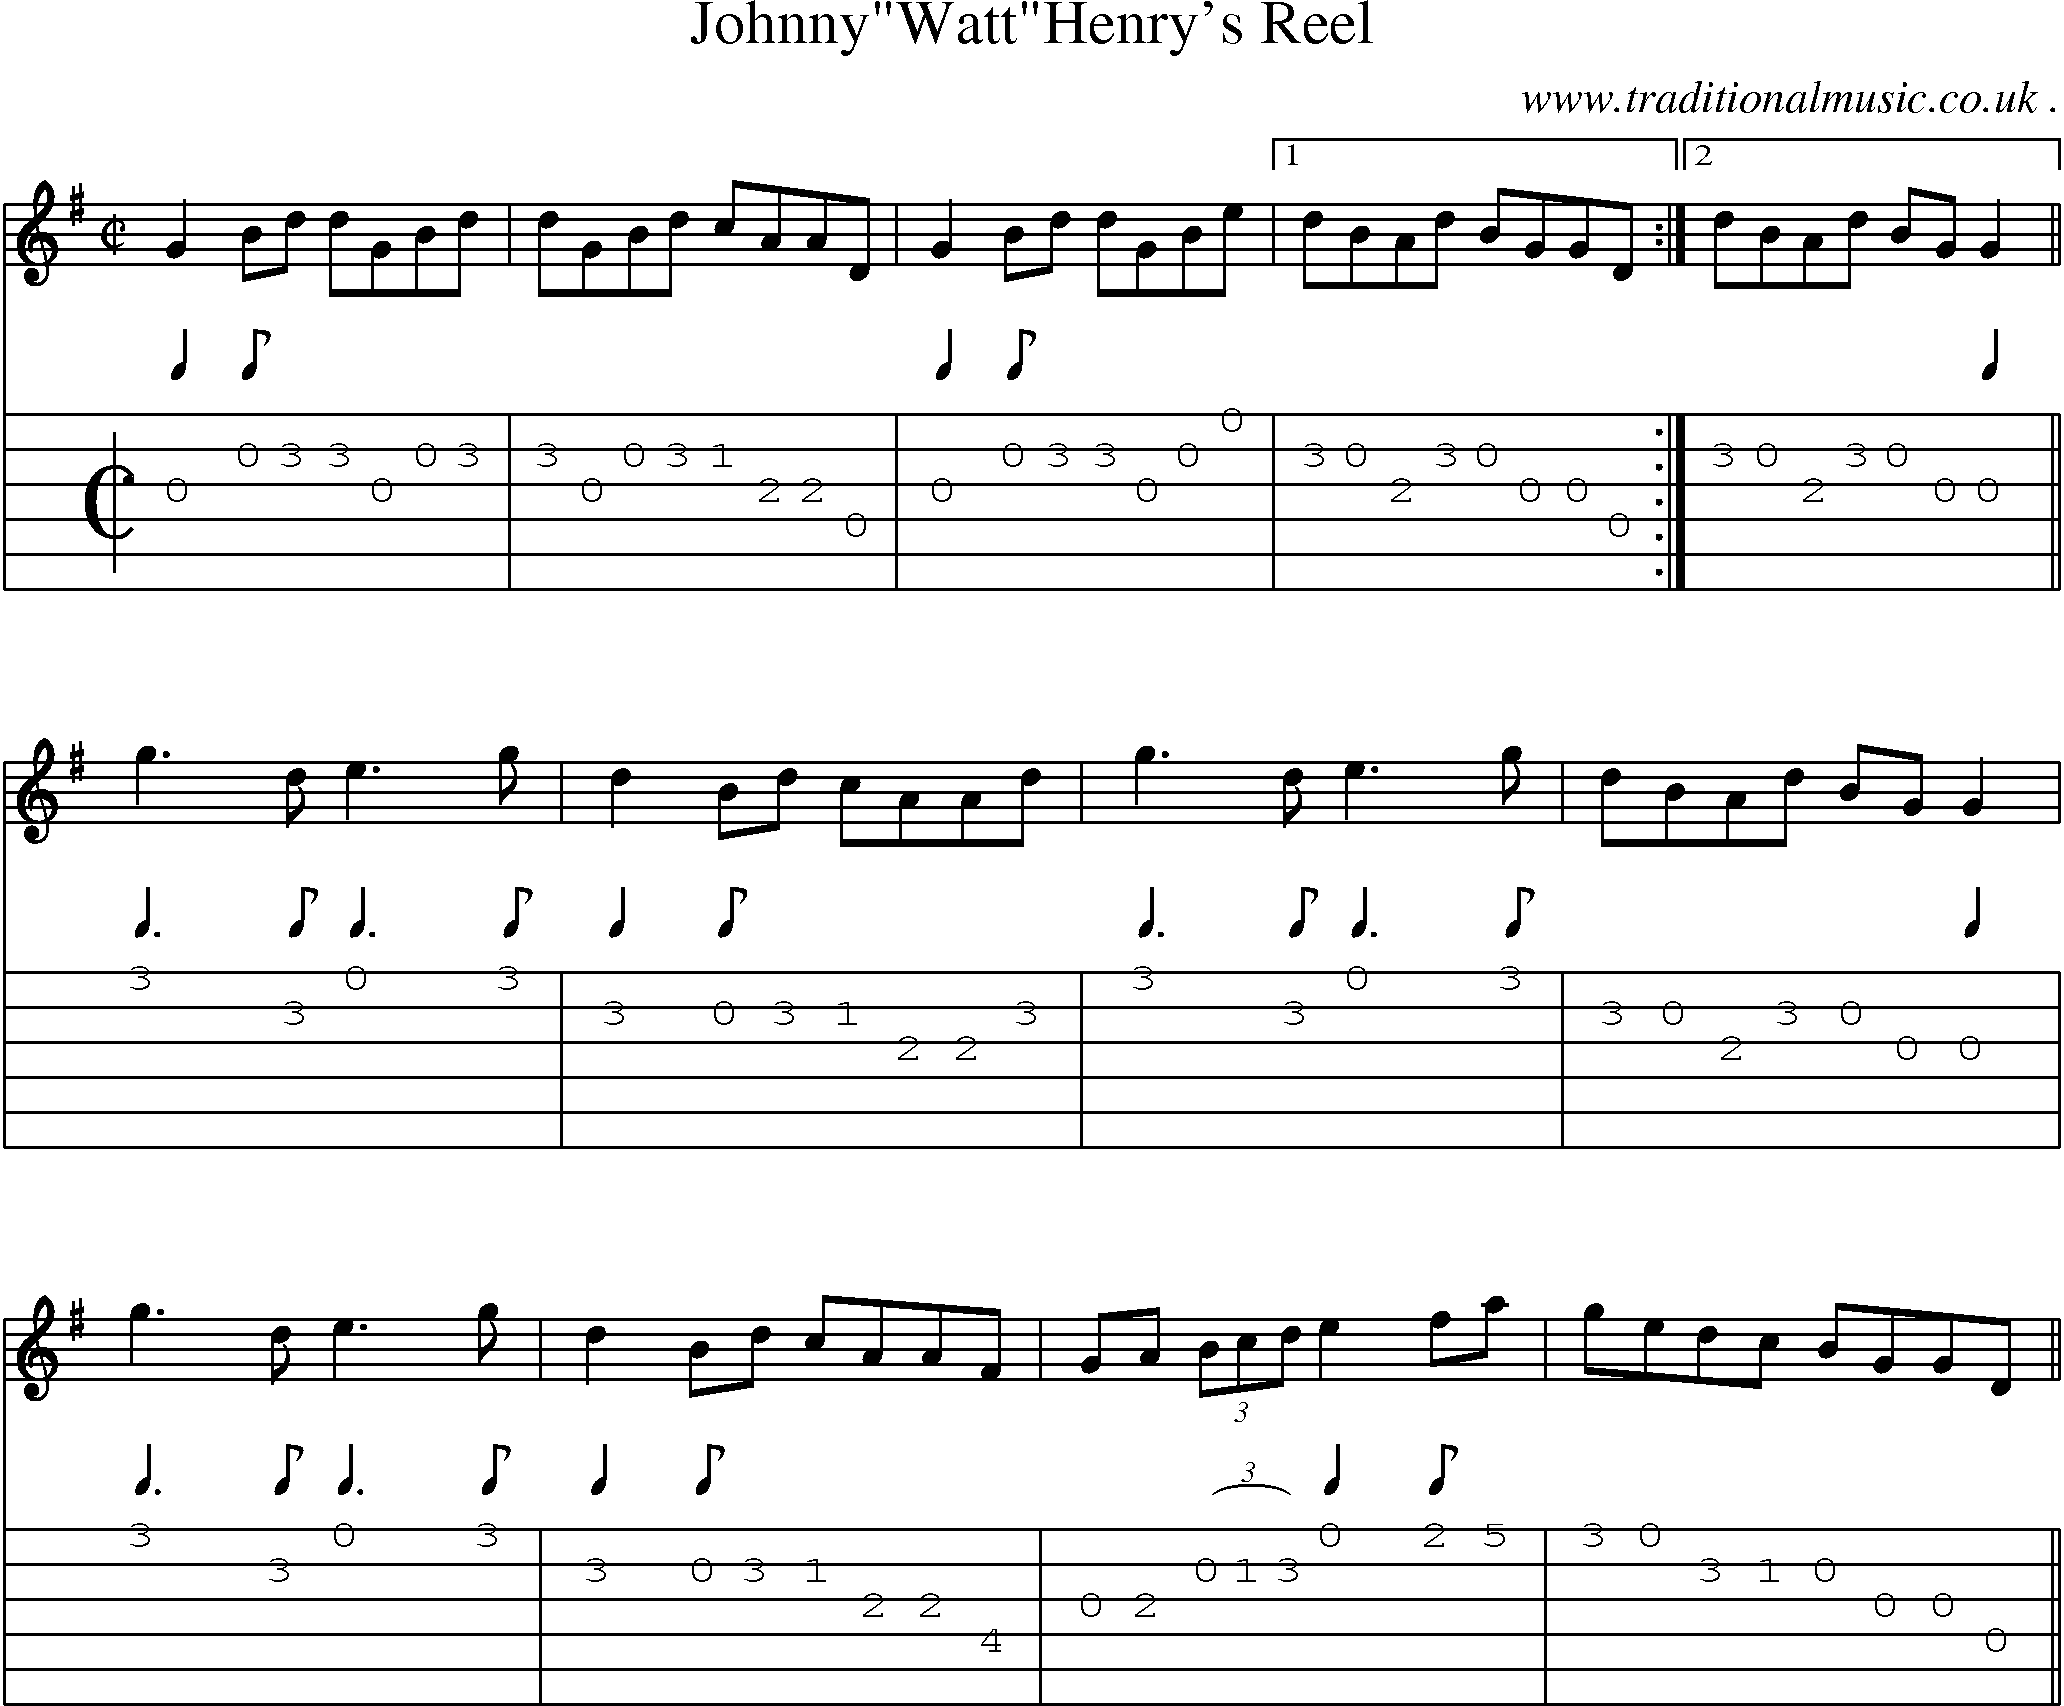 Sheet-Music and Guitar Tabs for Johnnywatthenrys Reel